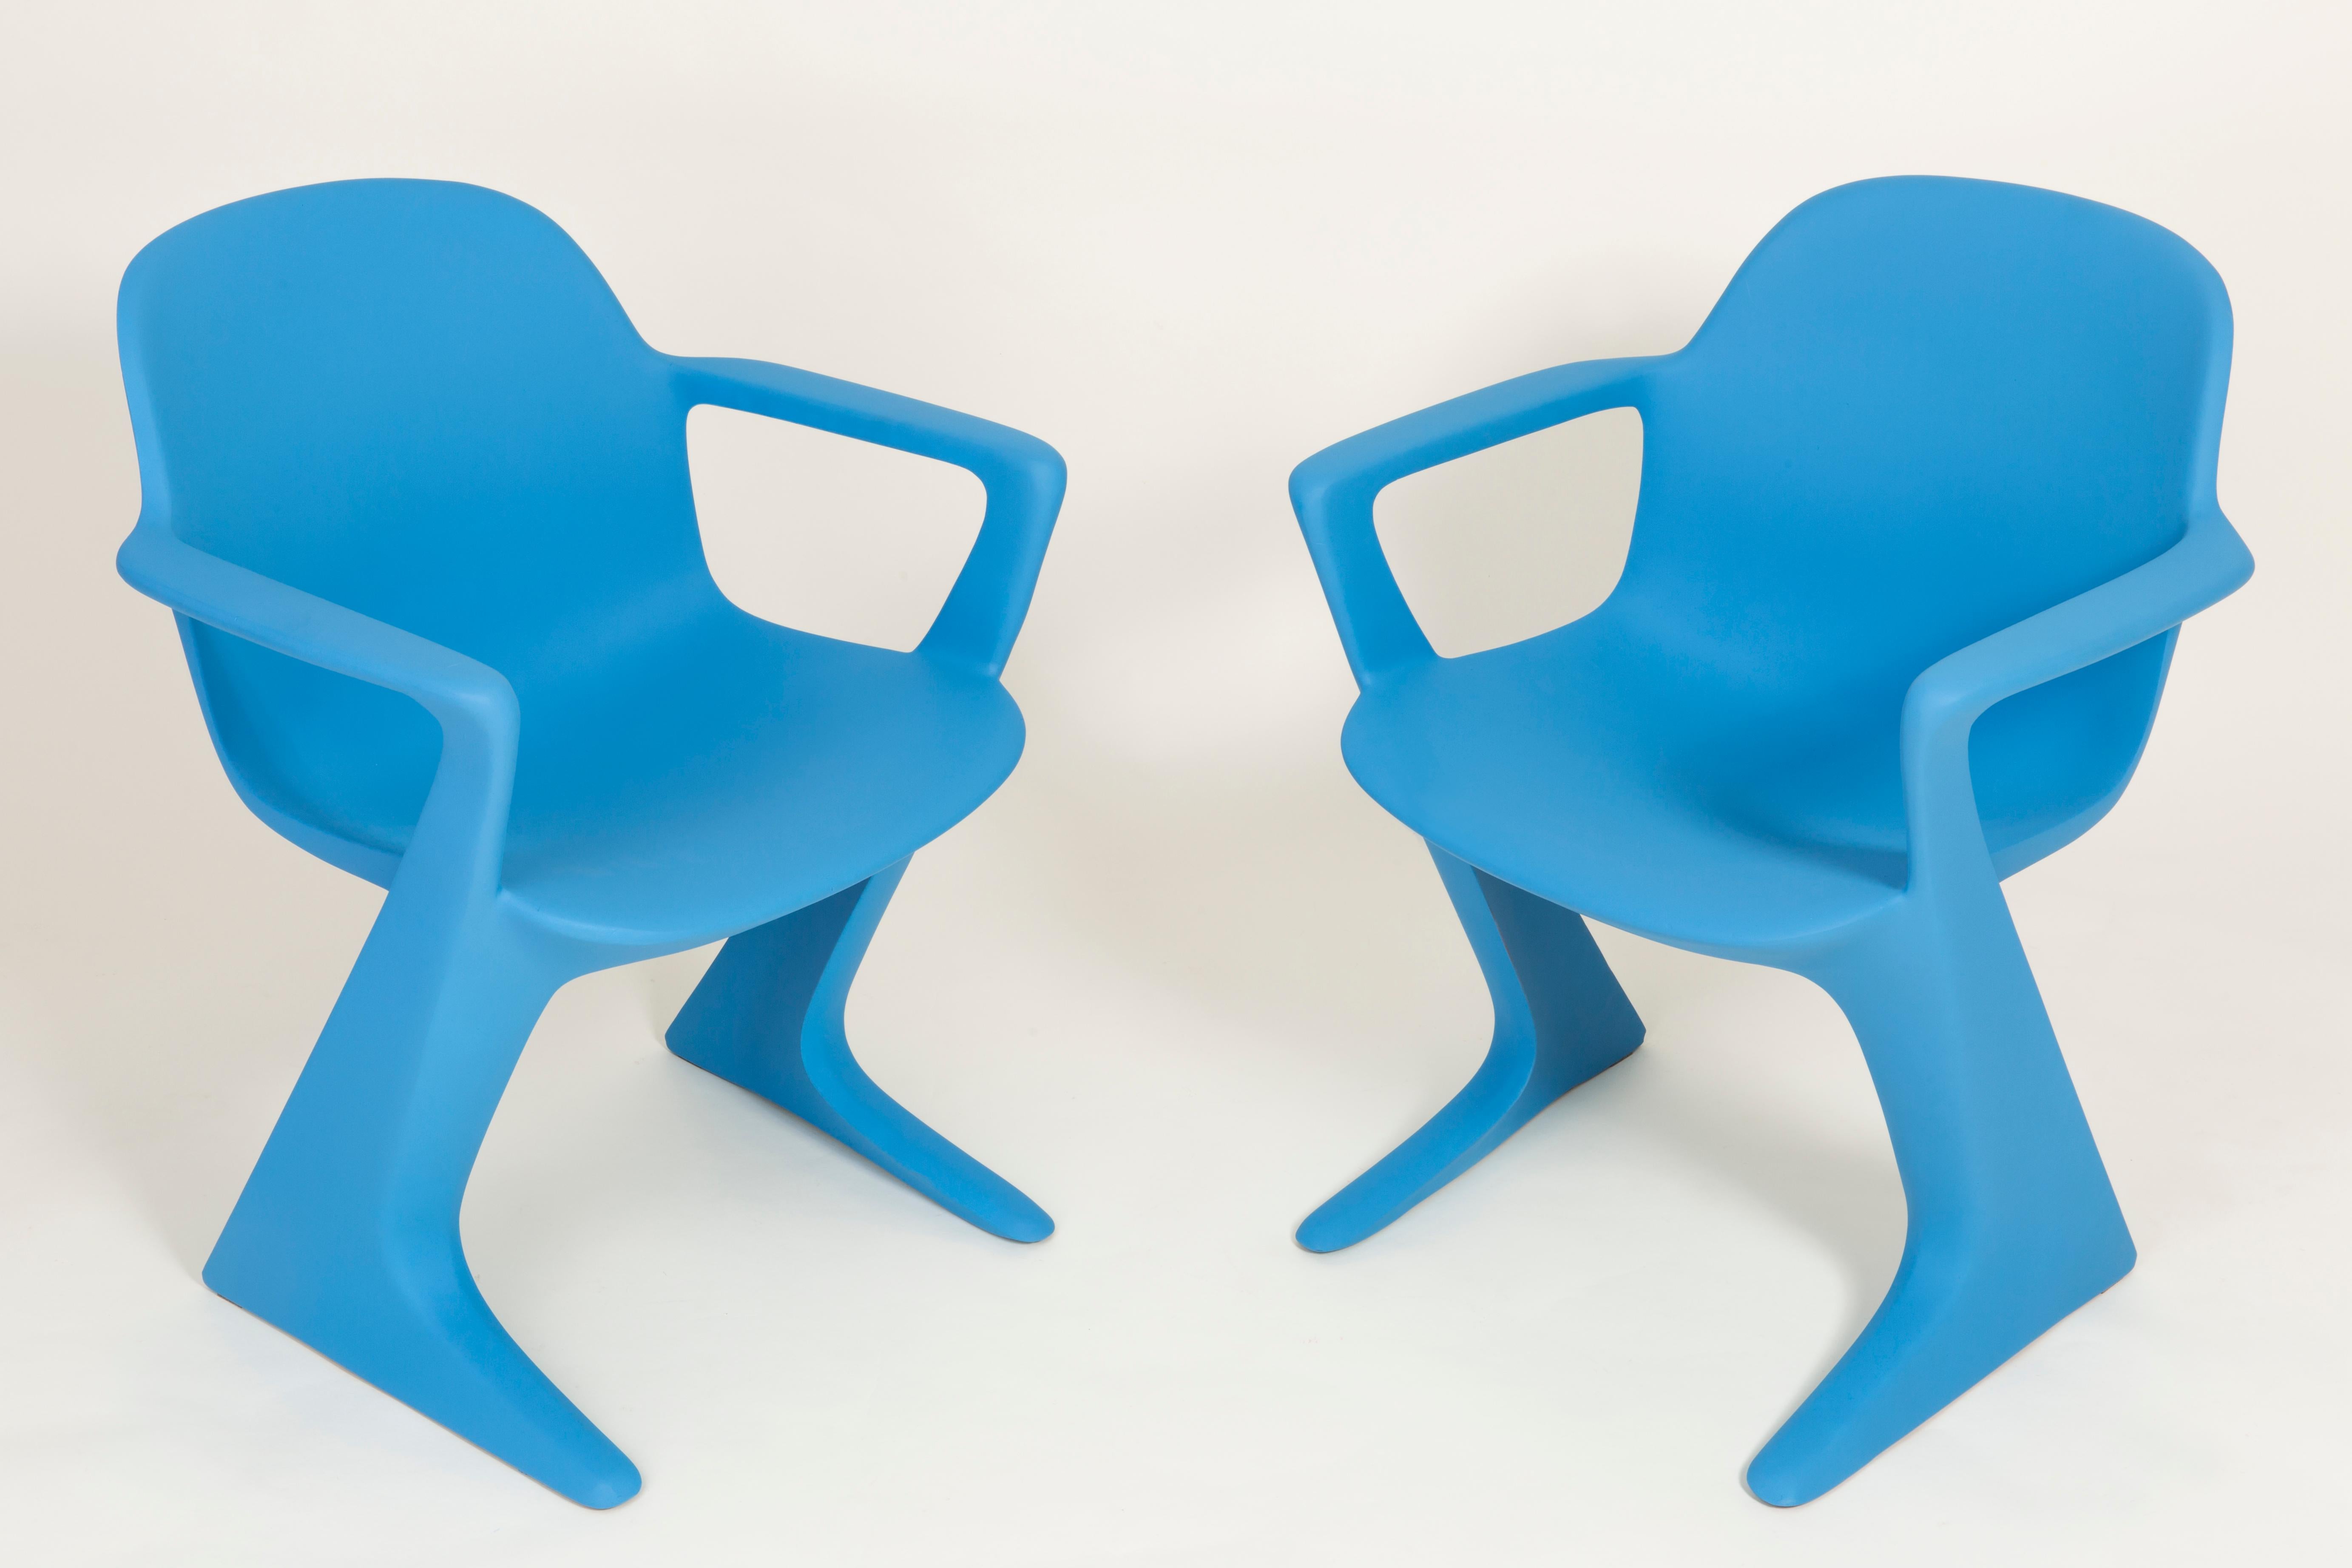 This set is called Z-chair. Designed in 1968 in the GDR by Ernst Moeckl and Siegfried Mehl, German Version of the Panton chair. Also called kangaroo chair or variopur chair. Produced in eastern Germany.

Chairs are after full renovation, new matte